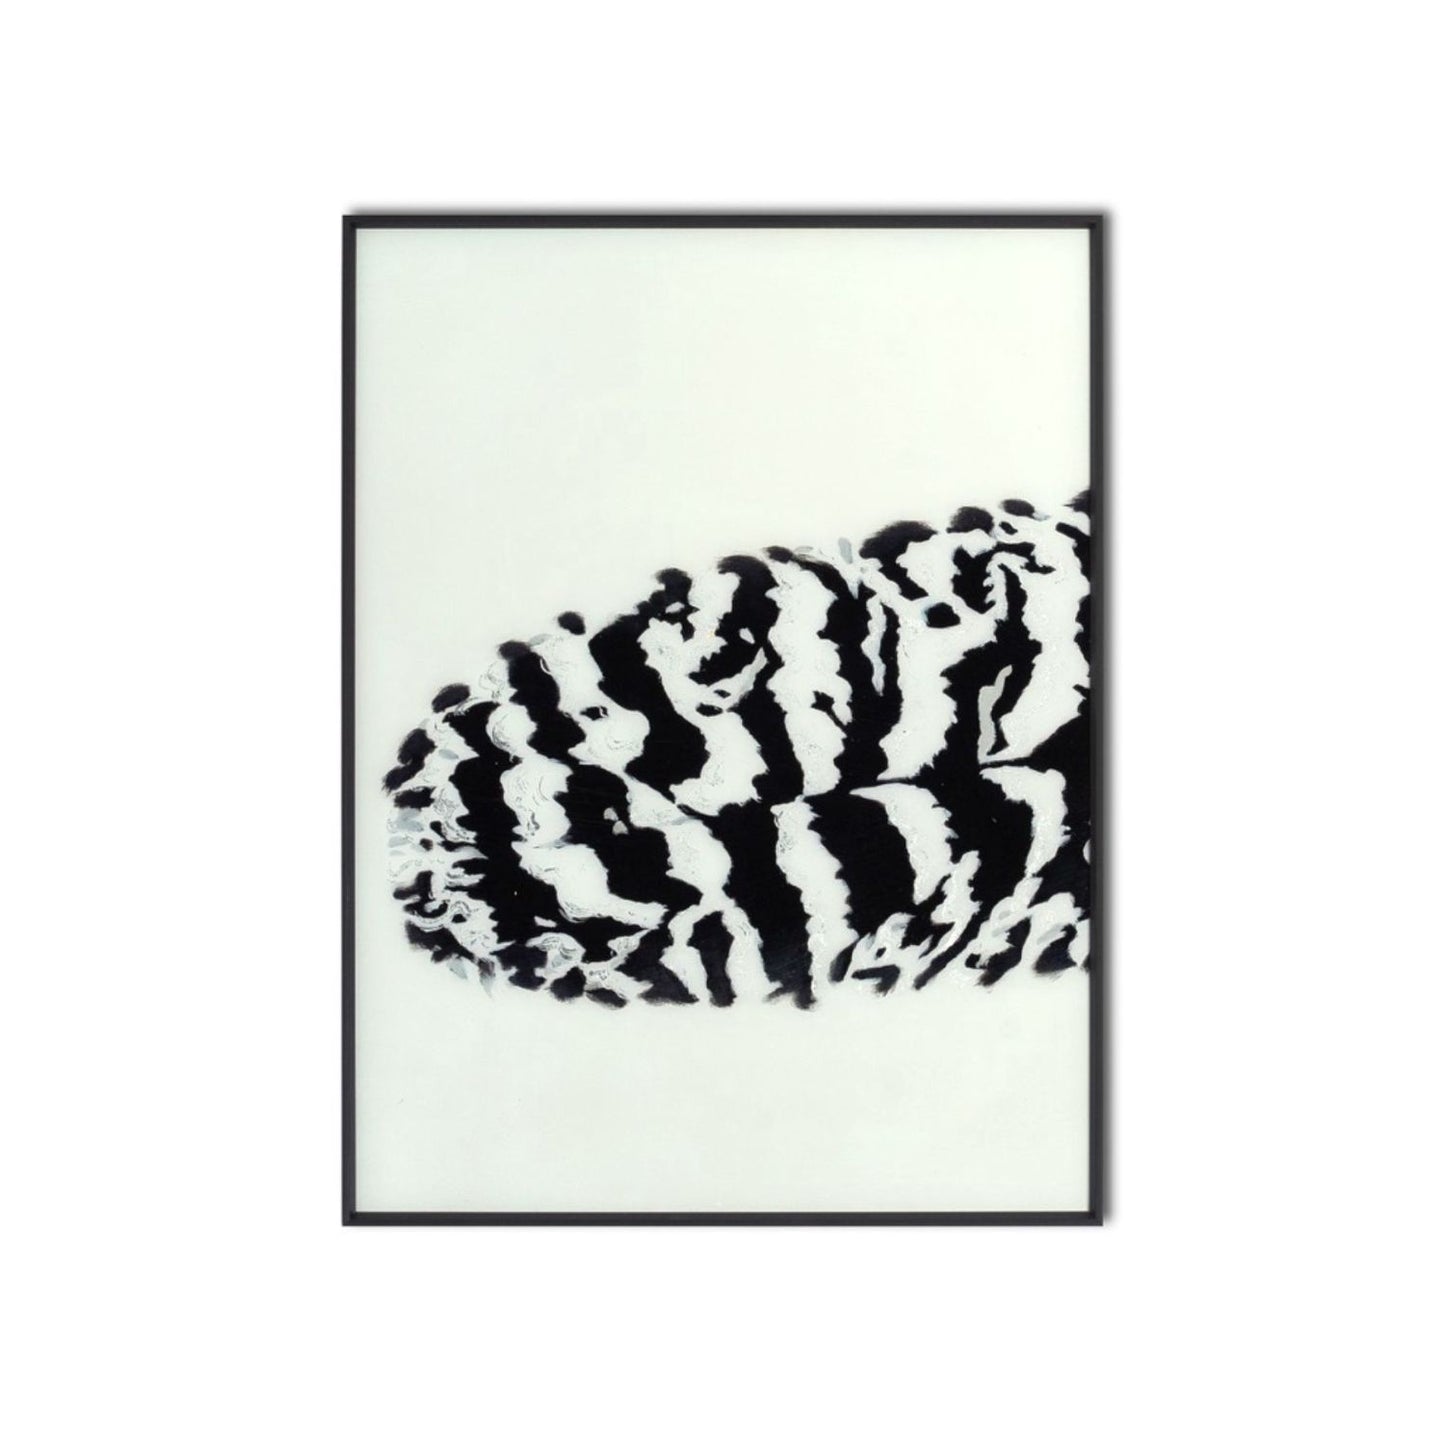 Feather artwork with three pictures in black and white with foil